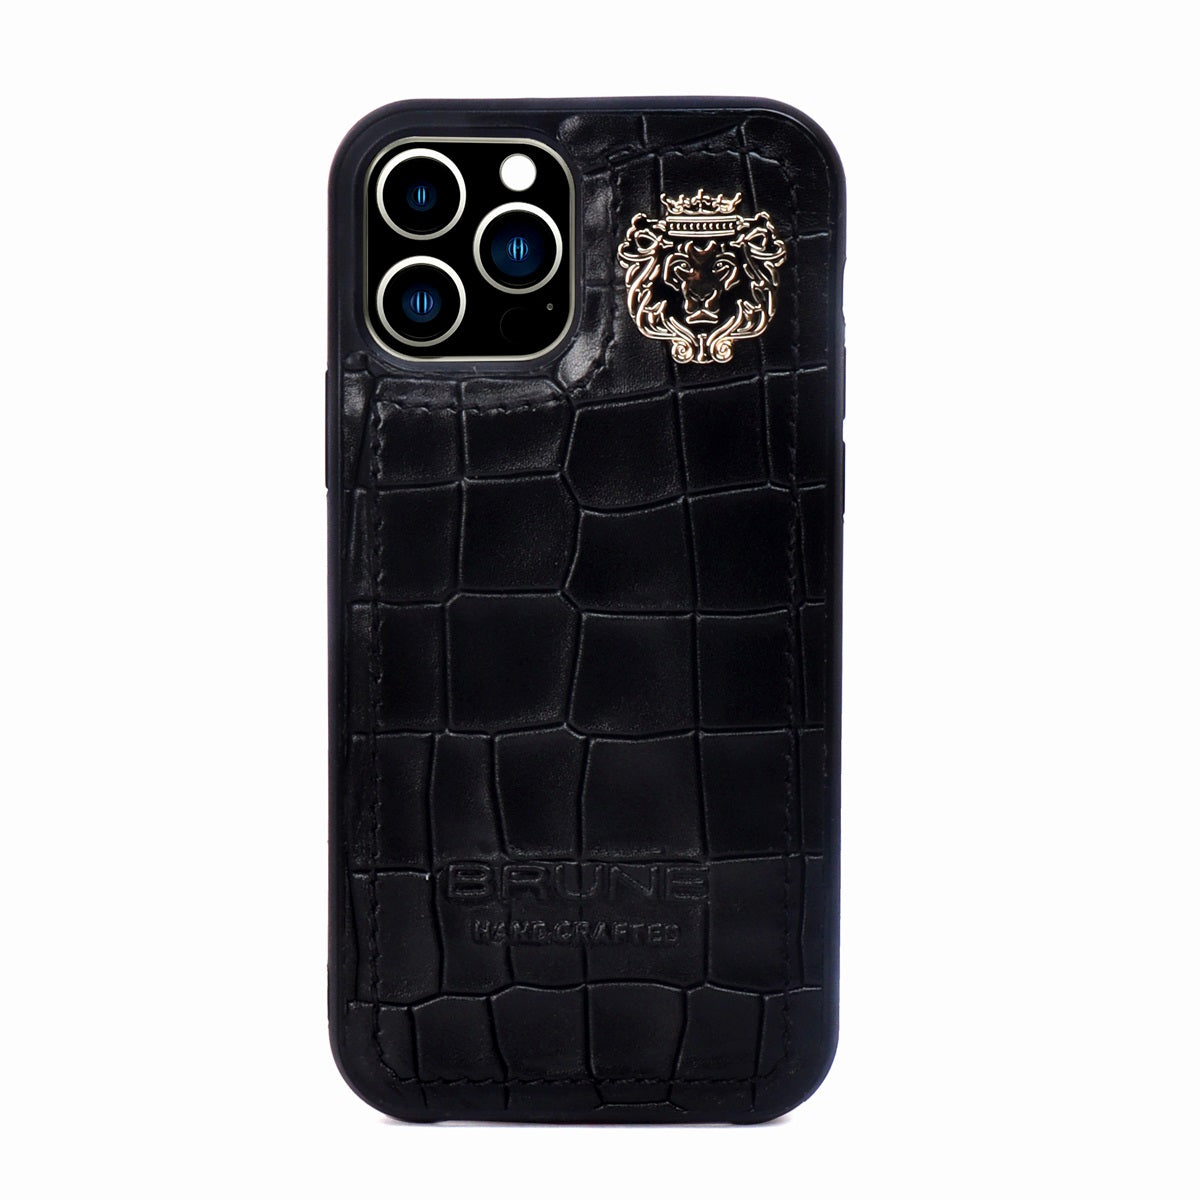 Black Mobile Cover Deep Cut Croco Textured Leather with Metal Lion Logo by Brune & Bareskin